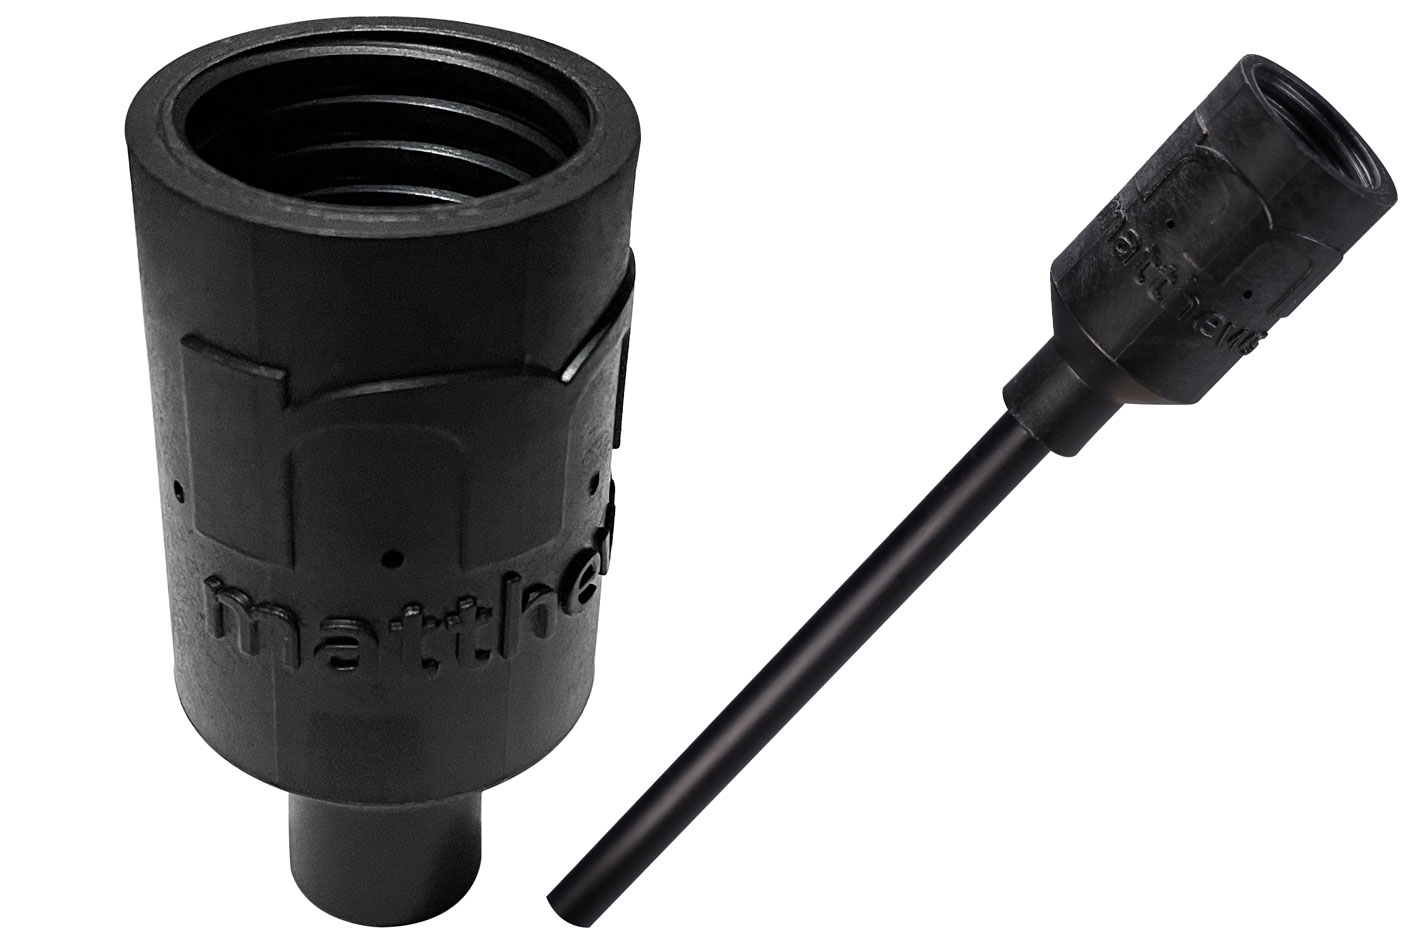 Matthews new bulb mount for Aputure and Astera LED bulbs 3